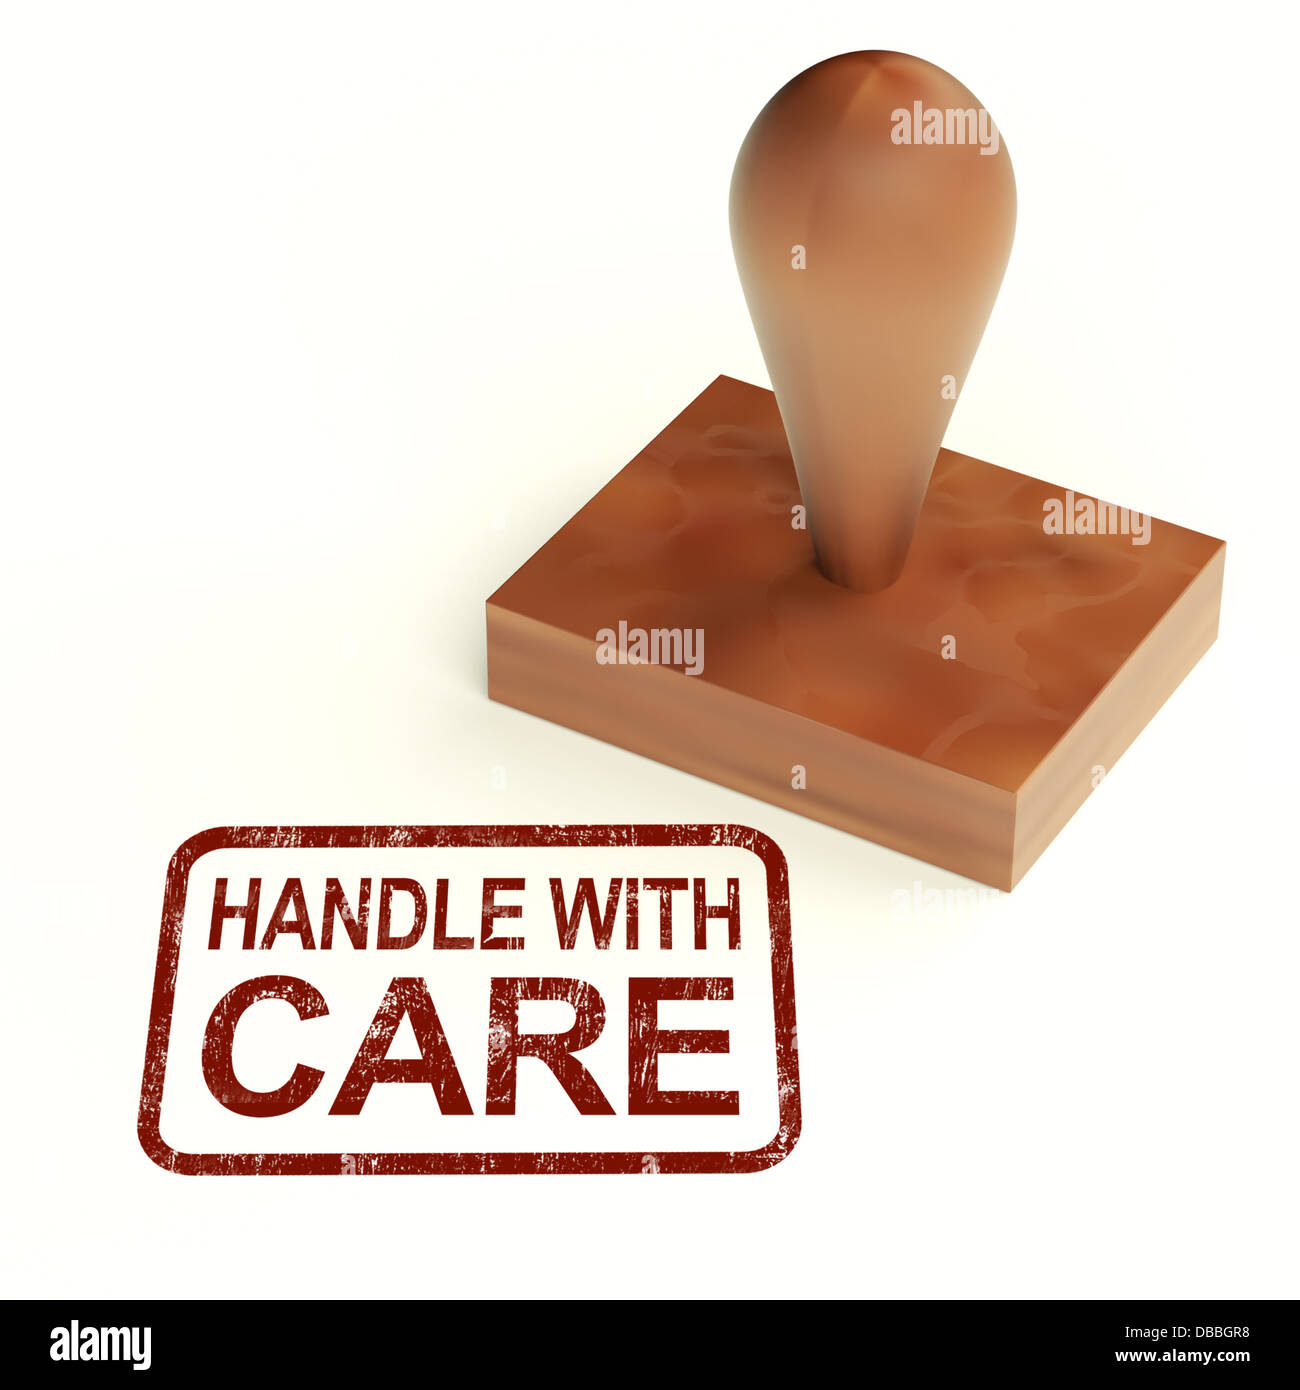 Handle With Care Stamp Shows Fragile Product Stock Photo